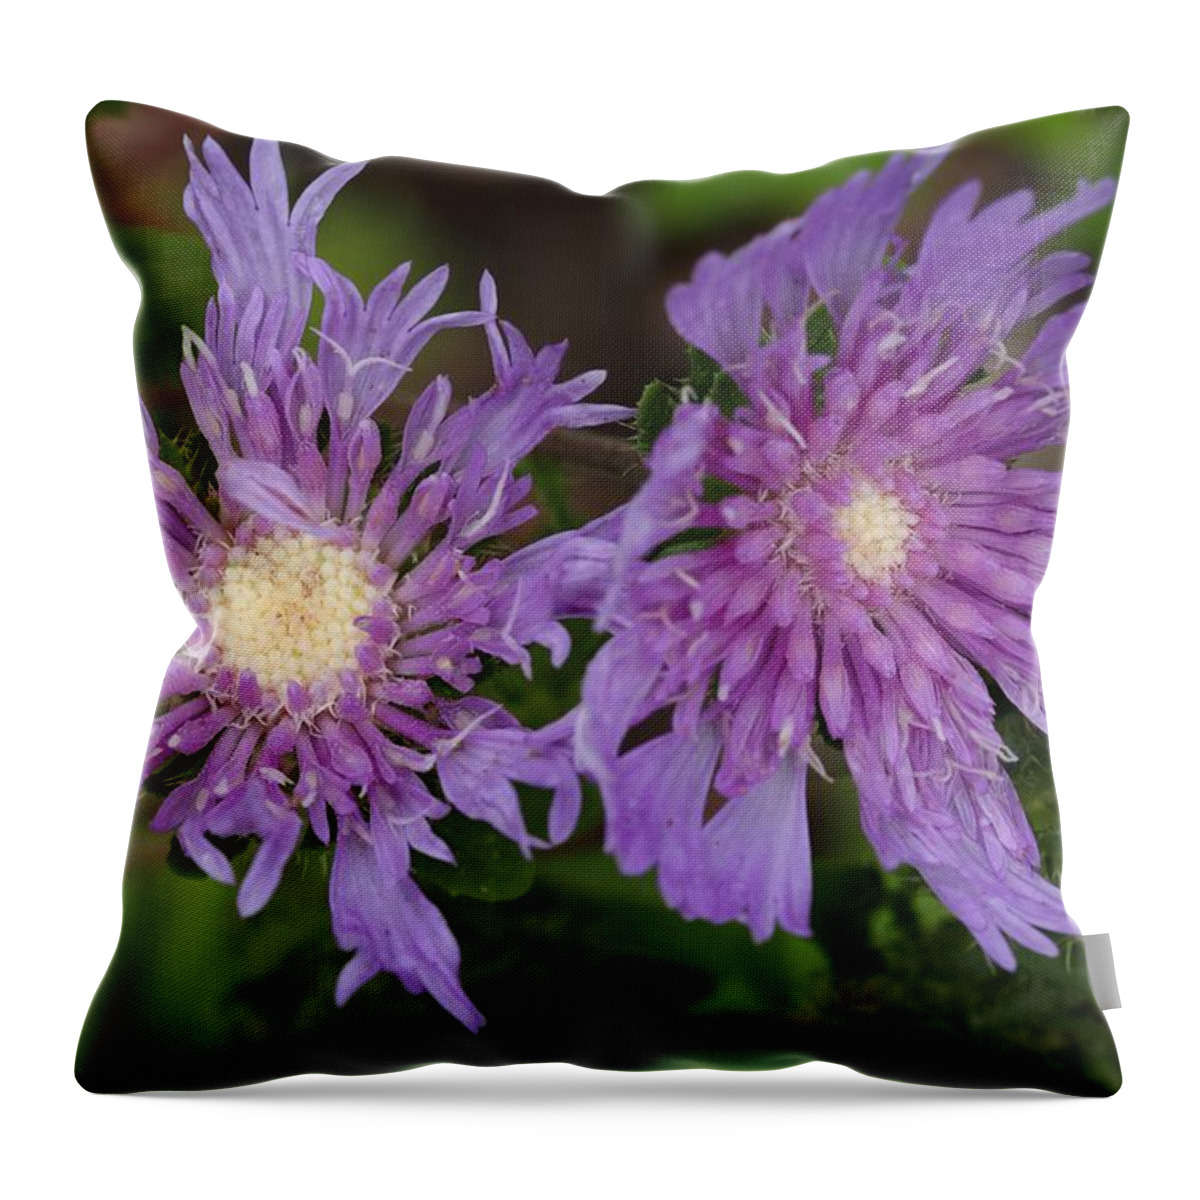 Stoke’s Aster Throw Pillow featuring the photograph Stoke's Aster Flower 5 by Mingming Jiang